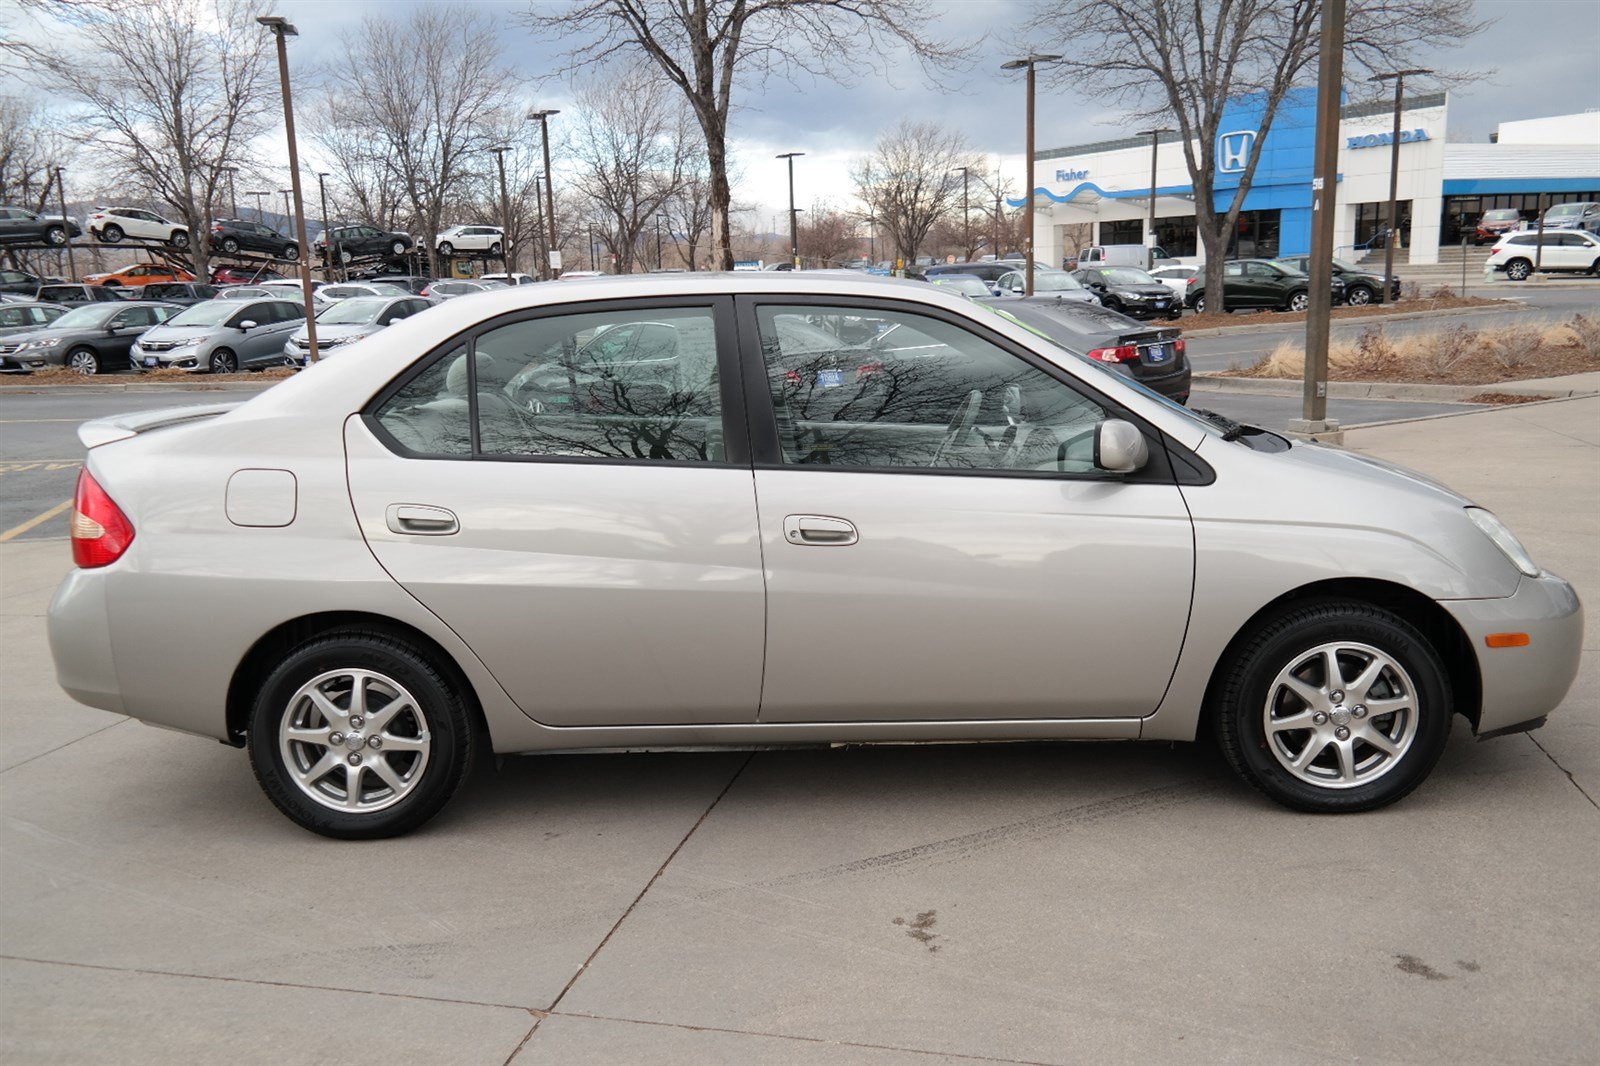 PreOwned 2002 Toyota Prius 4dr Sdn 4dr Car in Boulder